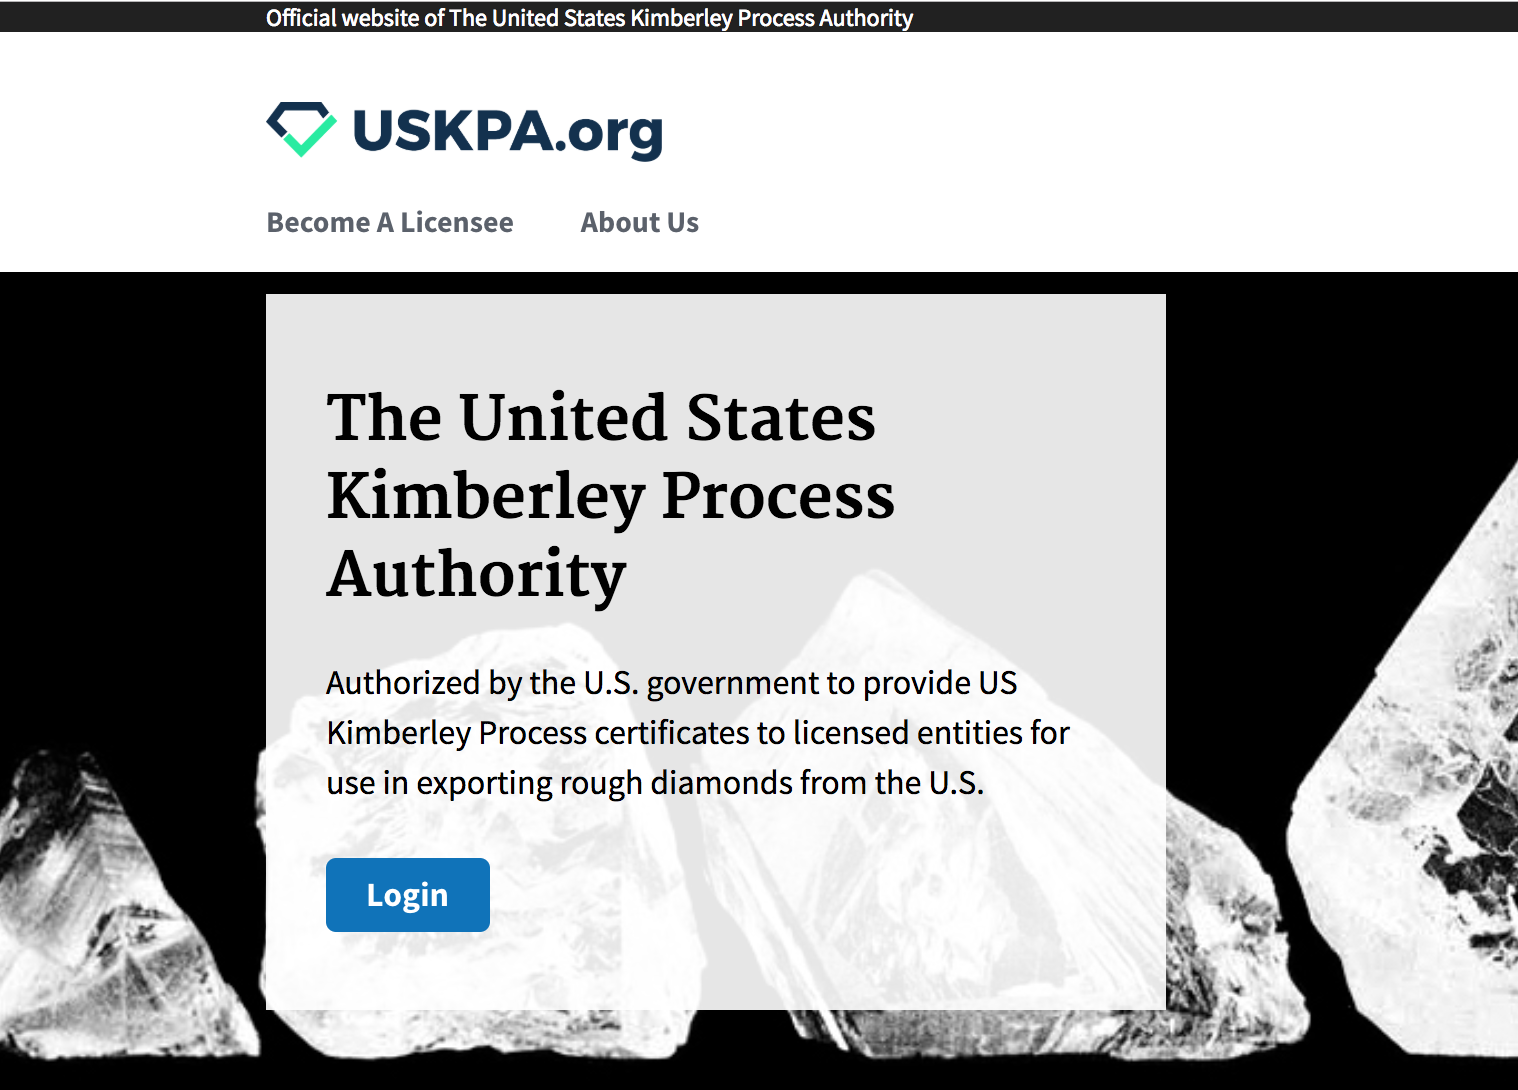 Screenshot of the uskpa.org front page